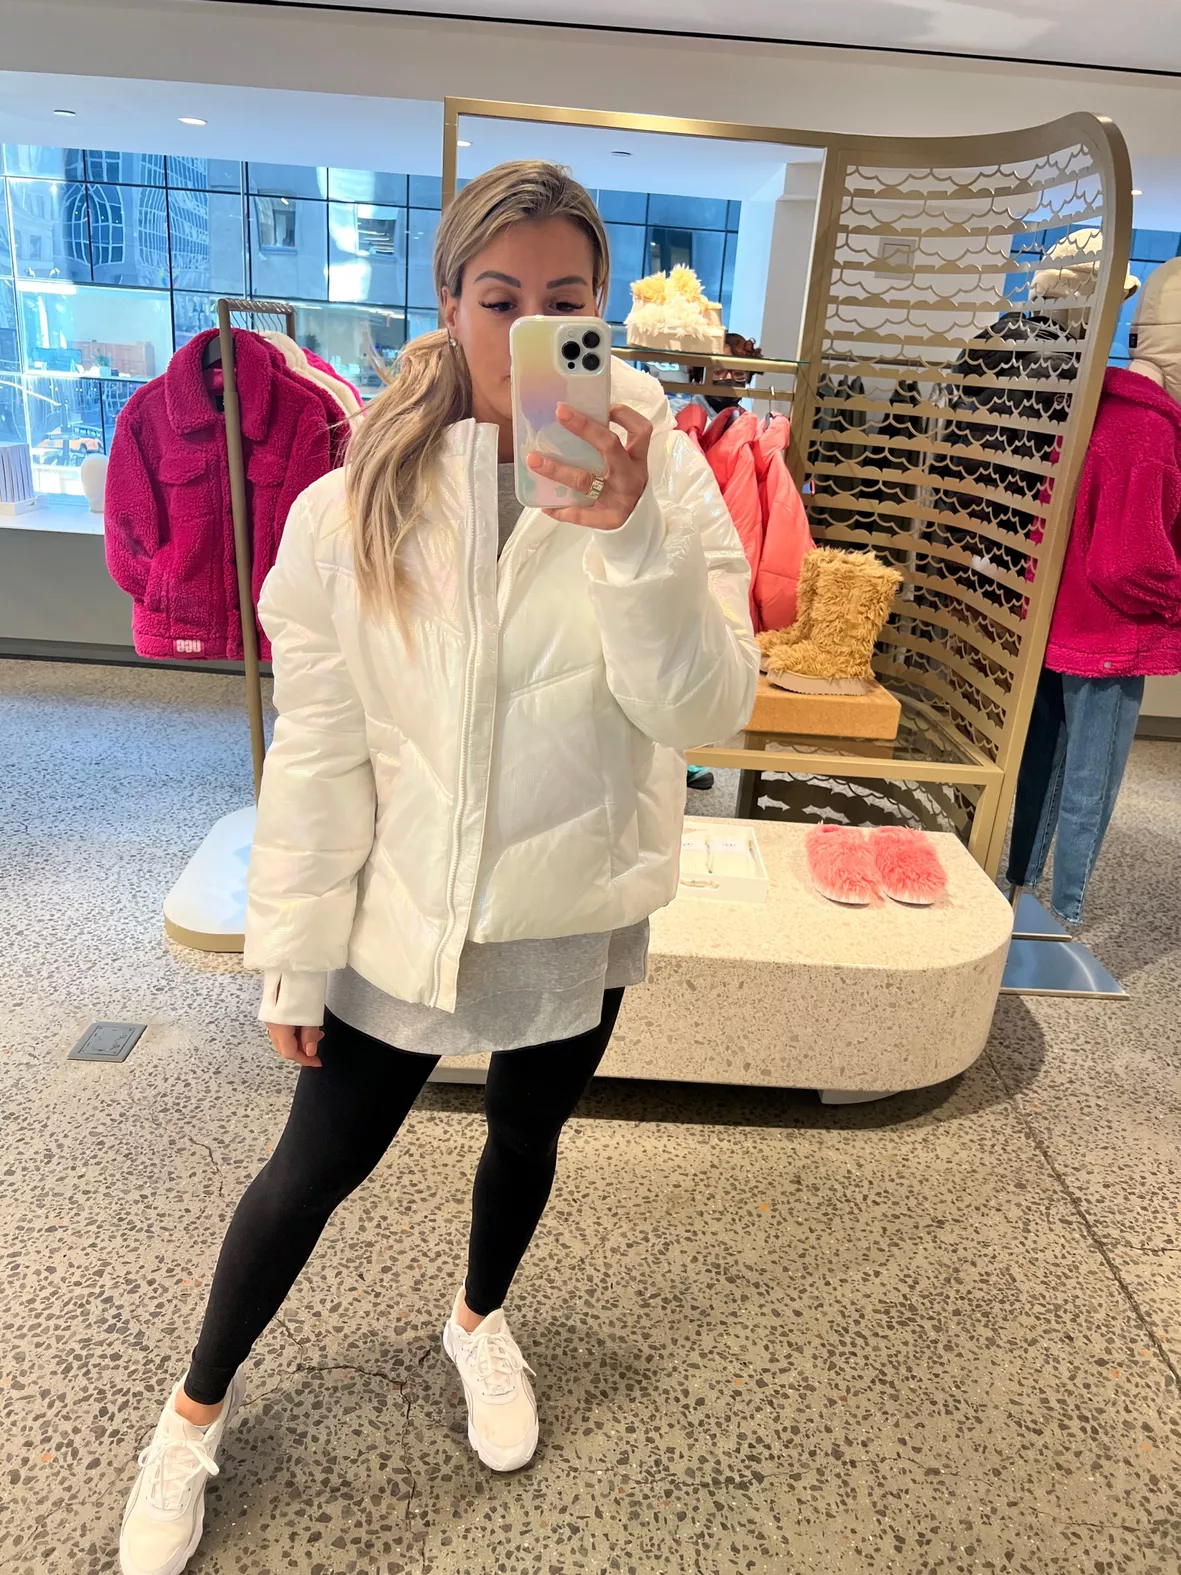 Ronney Cropped Puffer Jacket